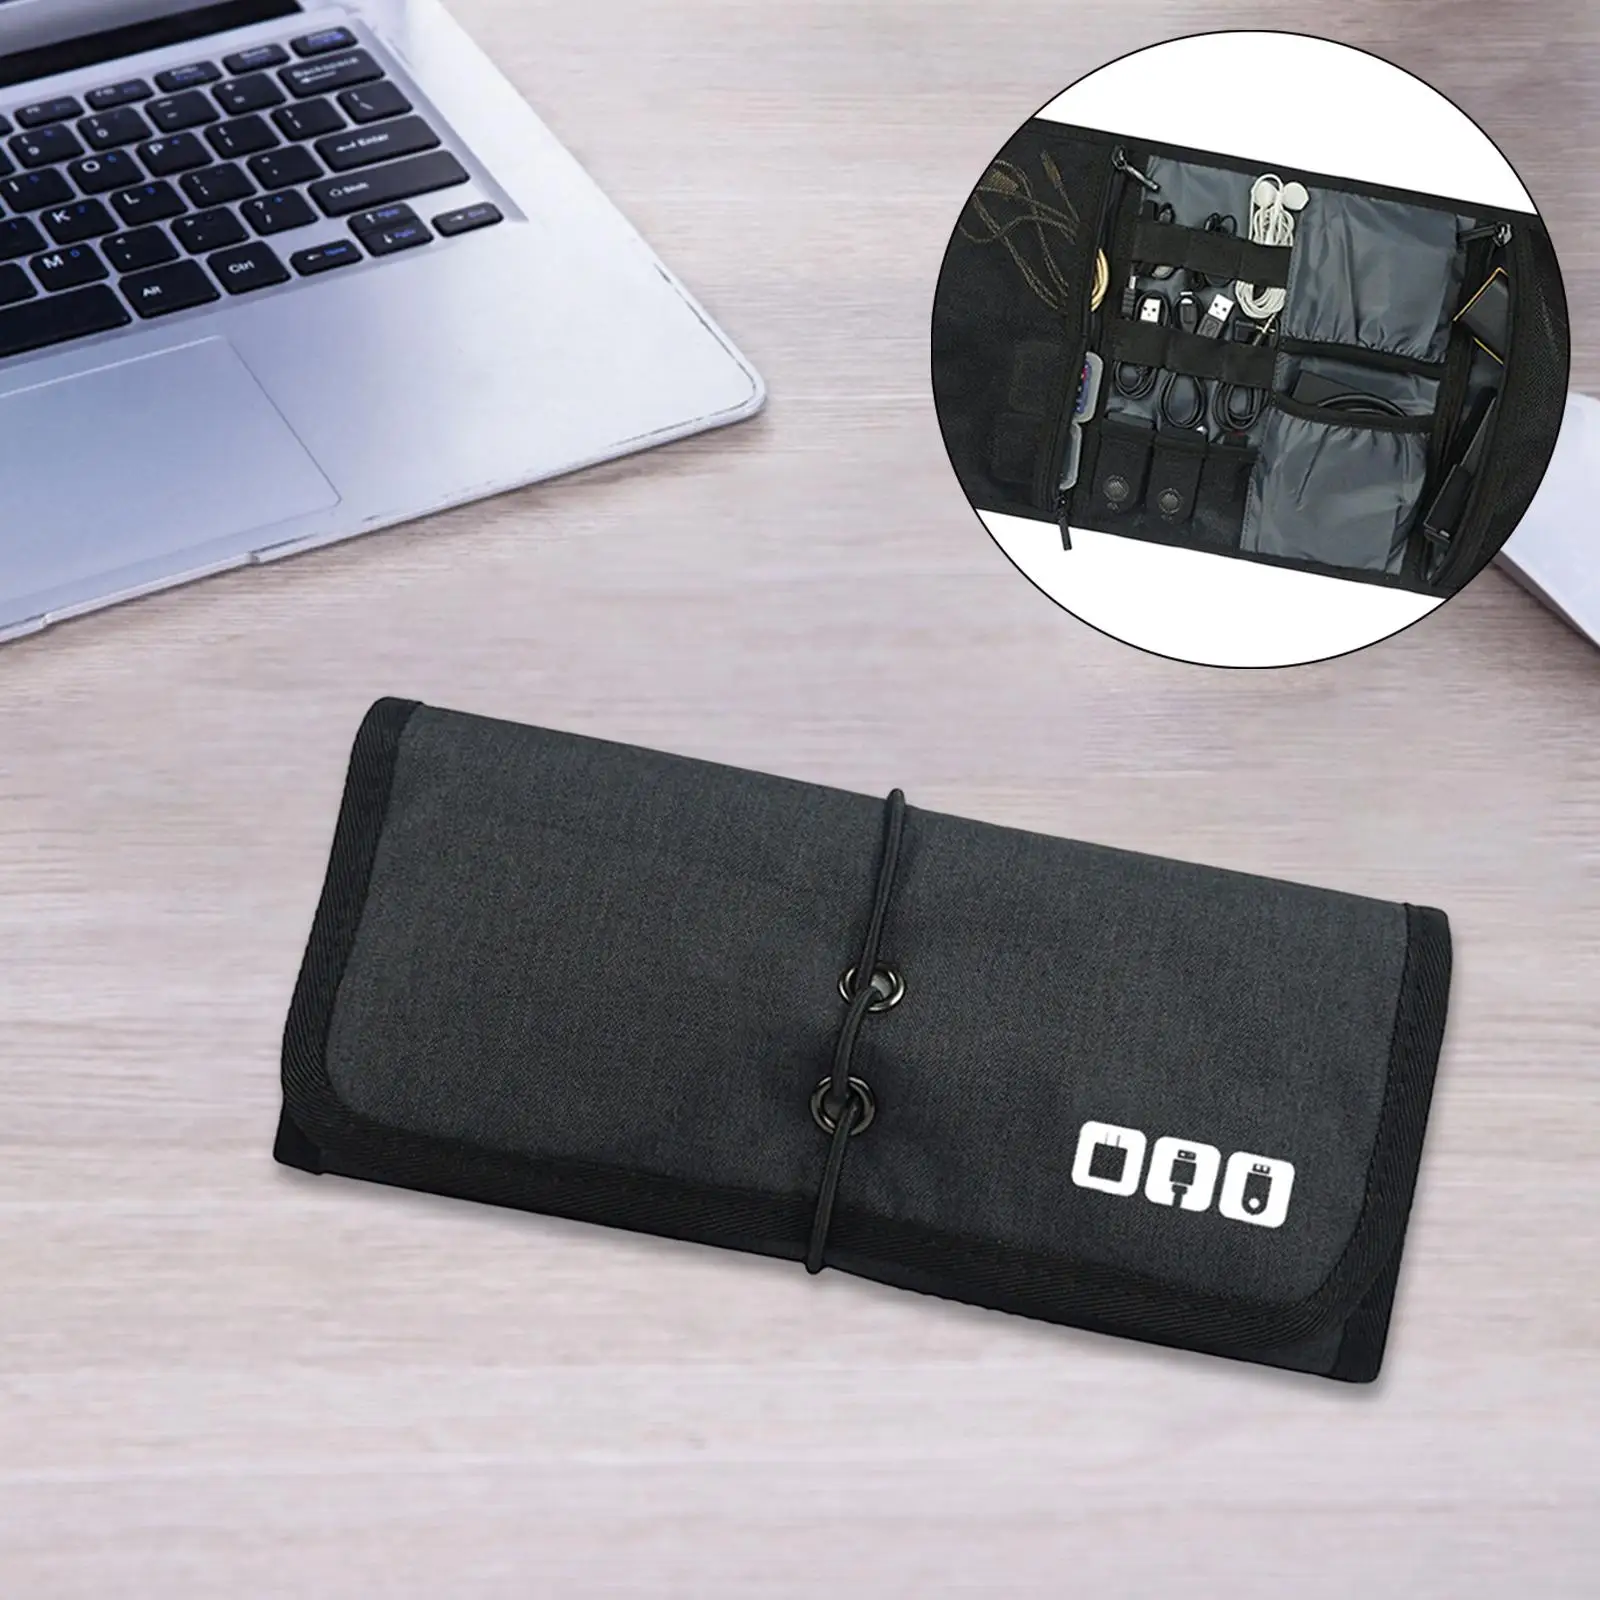 Portable Multifunction Pouch Travel Small Cable Organizer Bag Electronic Organizer for Hard Drives Card Phone USB Earphone